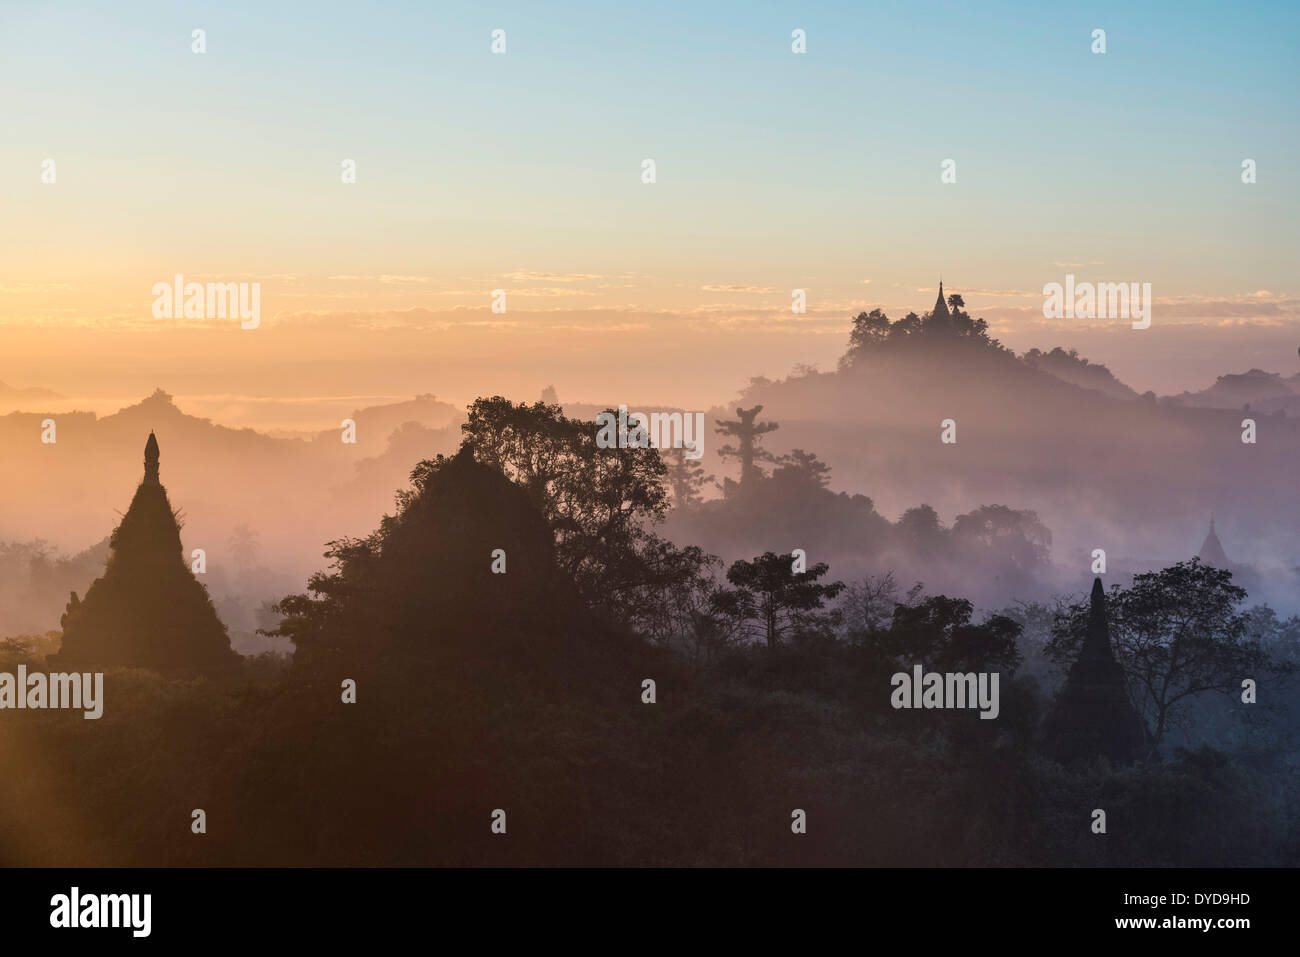 Pagodas surrounded by trees, in the mist, in the morning light, Mrauk U, Sittwe District, Rakhine State, Myanmar Stock Photo